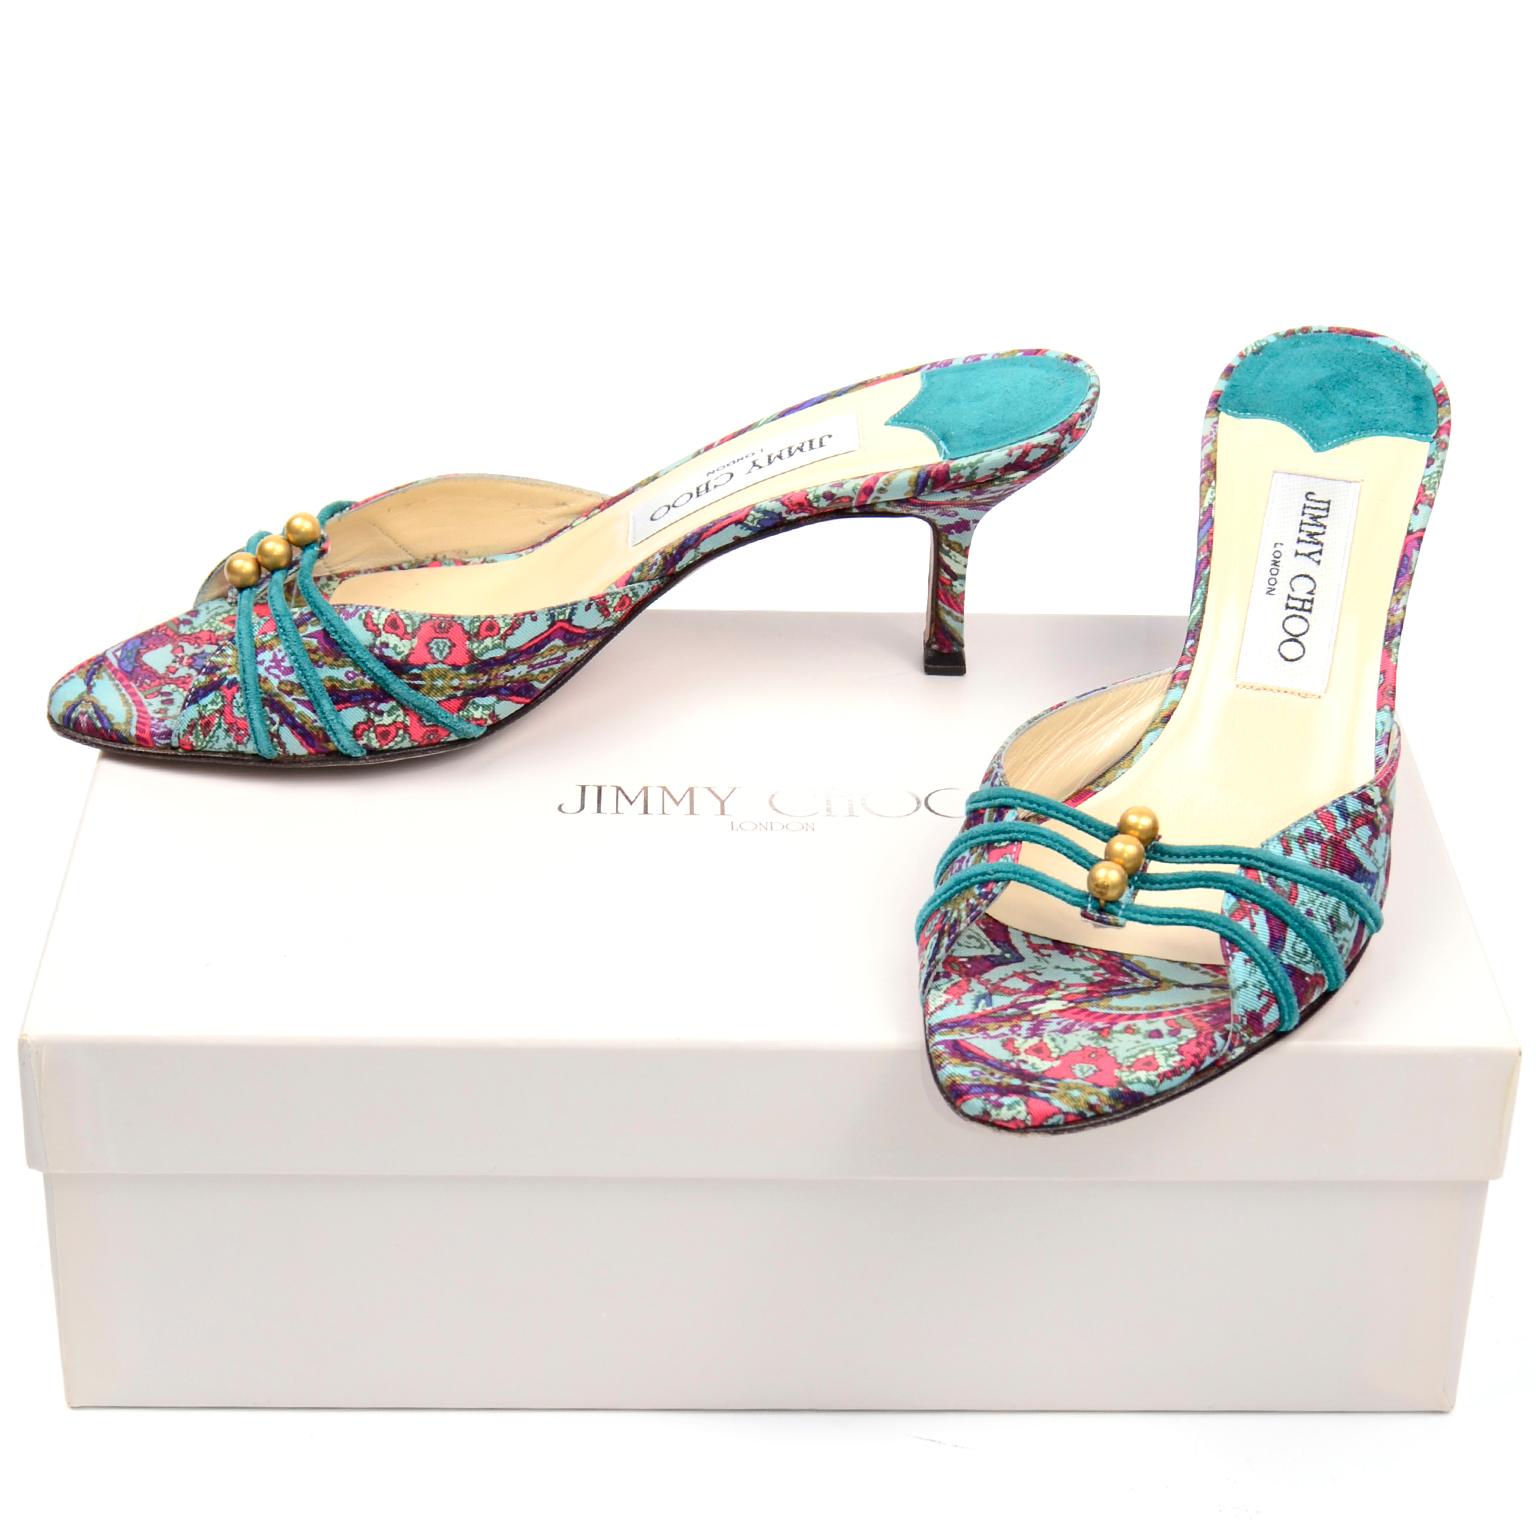 These are really fun turquoise green paisley print Jimmy Choo heeled mules. These shoes have a beautiful 3 strap with pretty gold beads with a slightly angled and pointed toe. The soles are made of leather and the shoes were made in Italy. The style